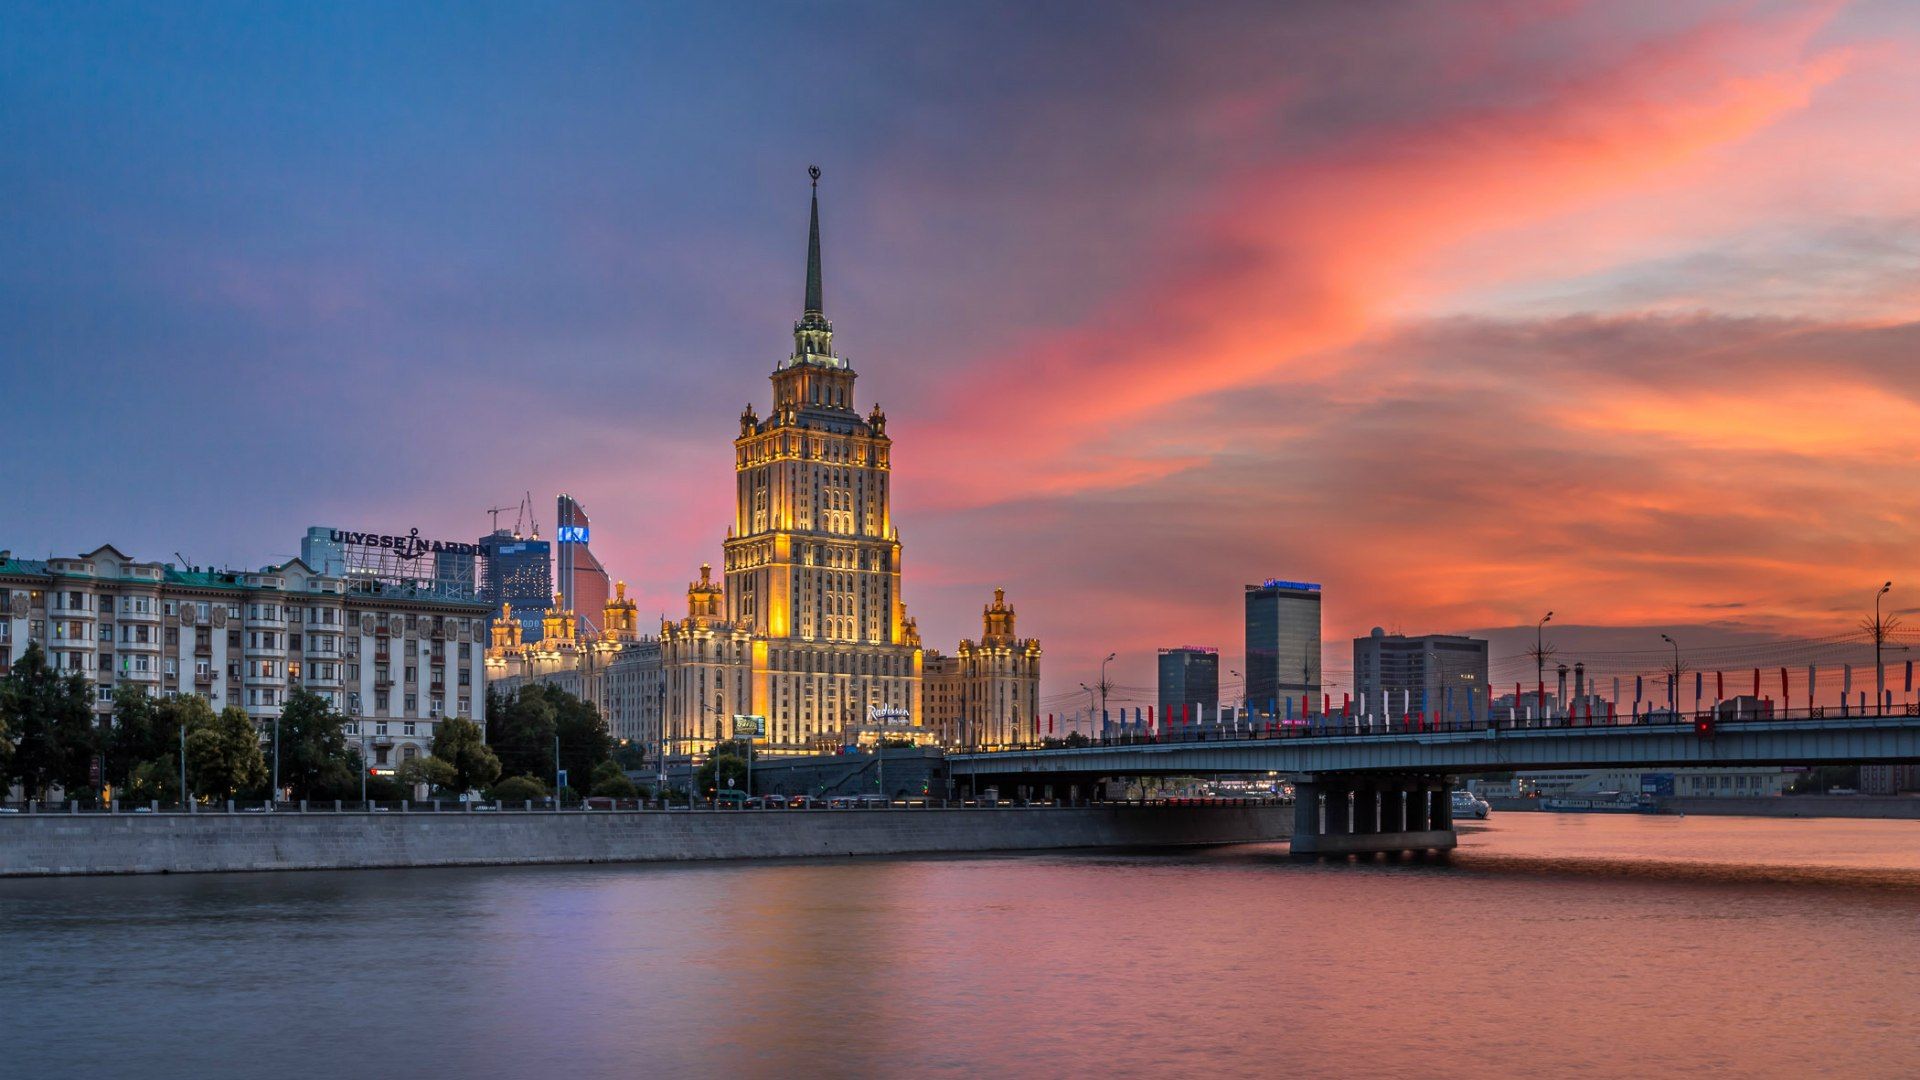 Hotel Ukraine in Moscow wallpapers and images - wallpapers ...